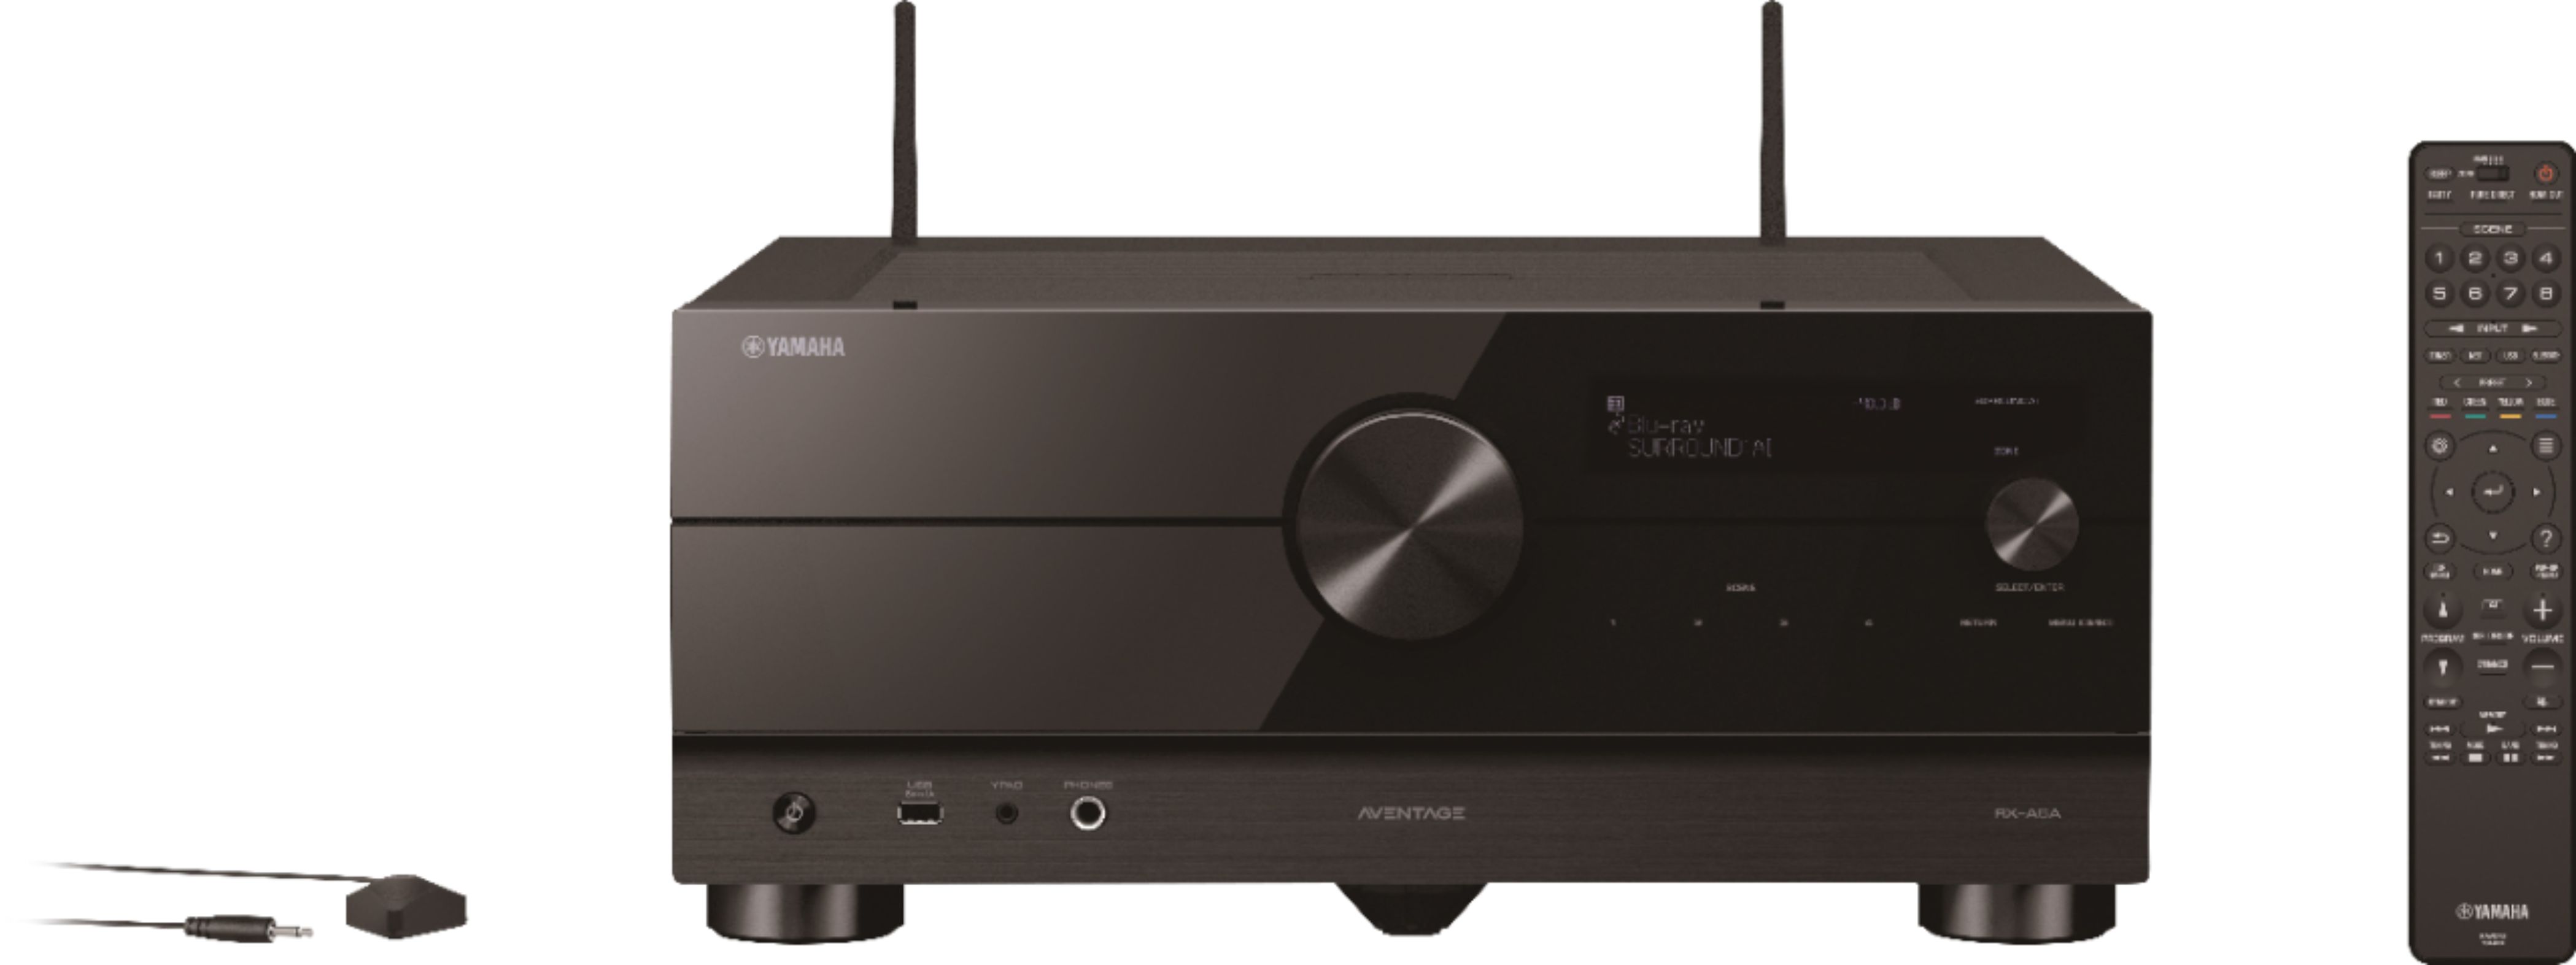 Yamaha AVENTAGE RX-A6A 150W 9.2-Channel AV Receiver with 8K HDMI 